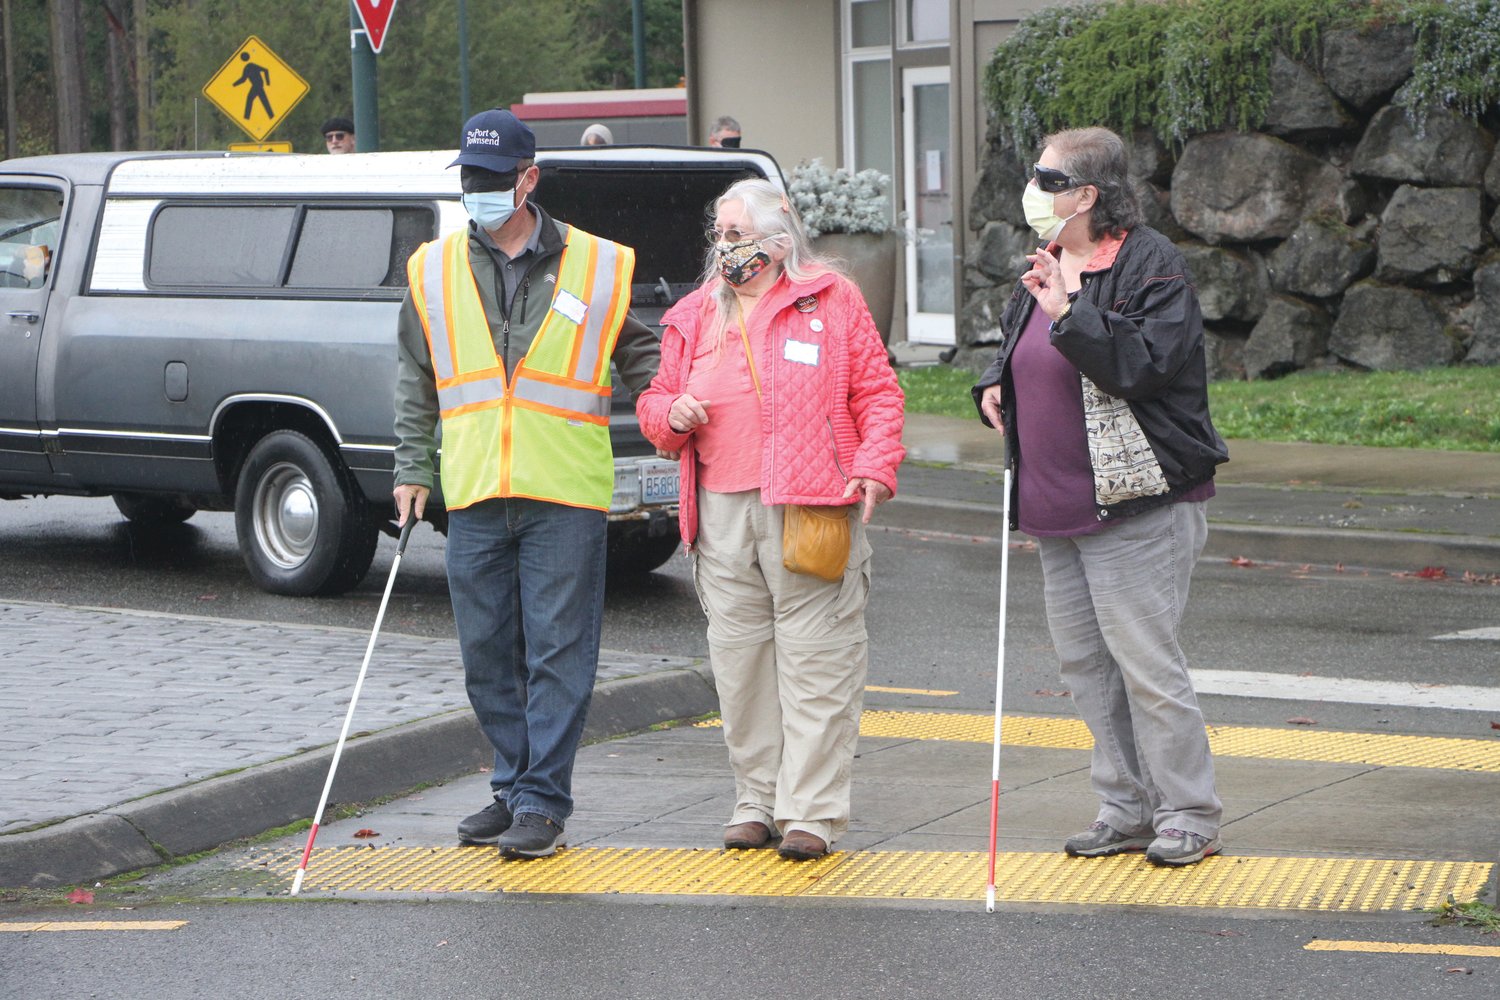 Port Townend Public Works Director Steve King is guided along a roundabout by DASH President Pat Teal during the organization’s simulation of crossing a roundabout while visually impaired on Oct. 29.